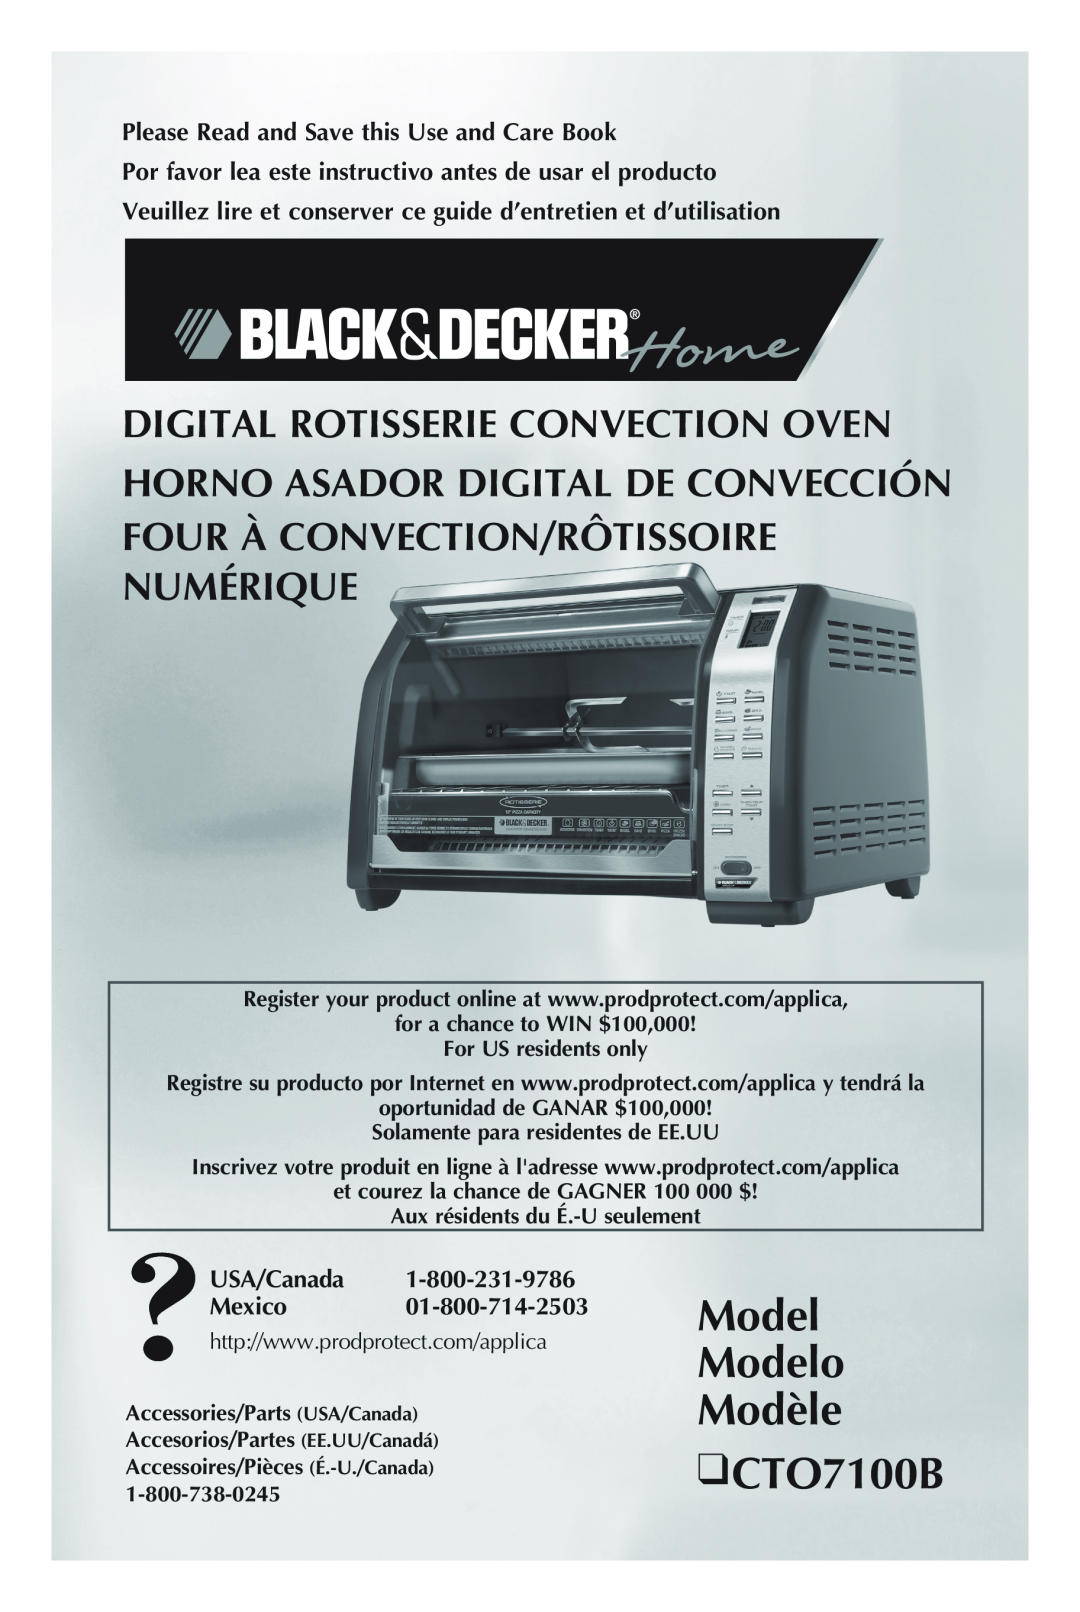 Black & Decker manual Model Modelo Modèle CTO7100B, Please Read and Save this Use and Care Book, USA/Canada Mexico 